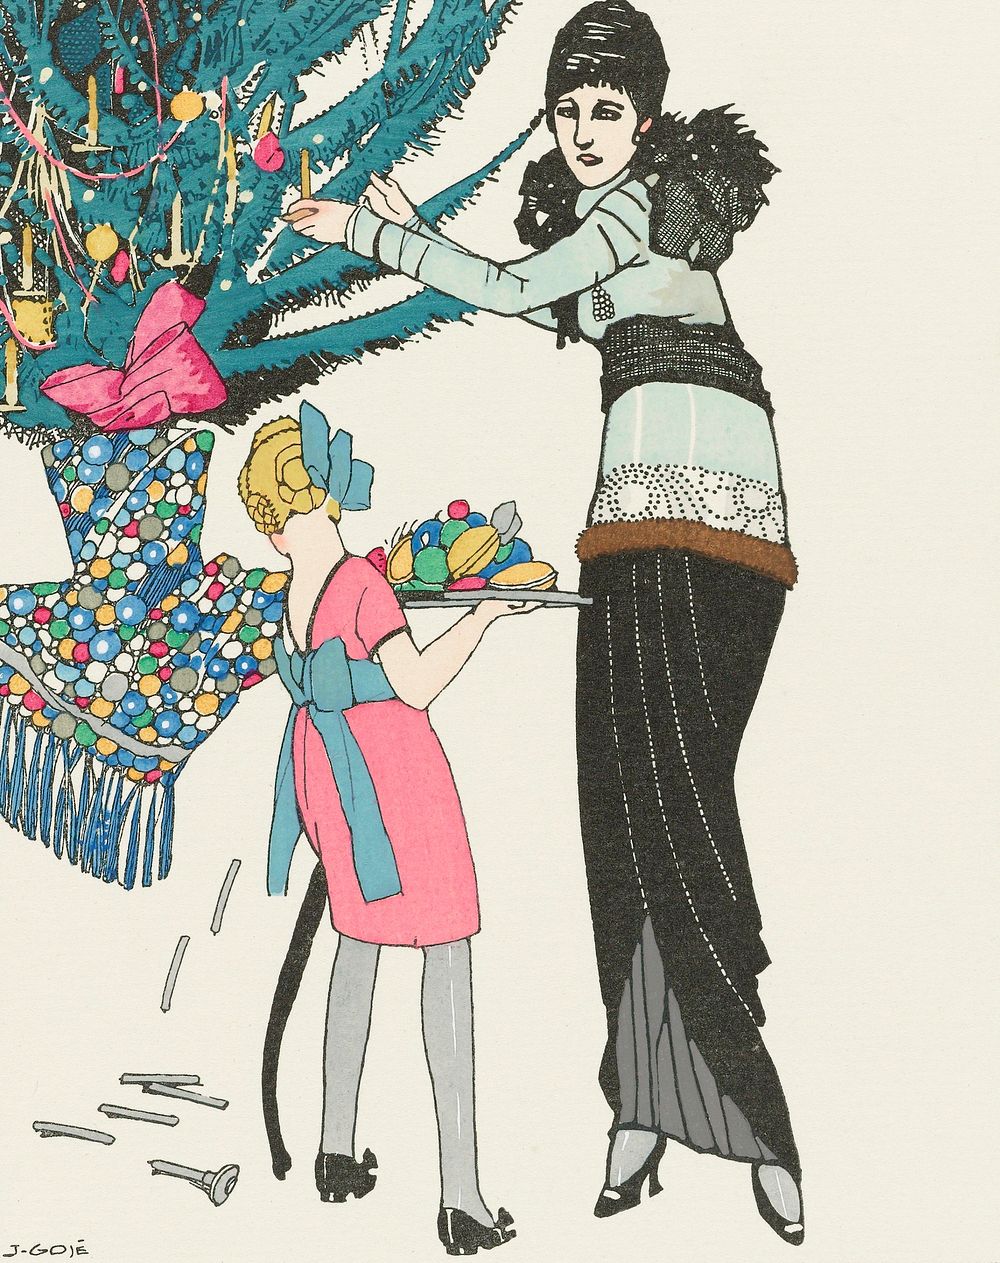 Christmas illustration (1914) by Francisco Javier Gos&eacute;. Original from The Rijksmuseum. Digitally enhanced by rawpixel.